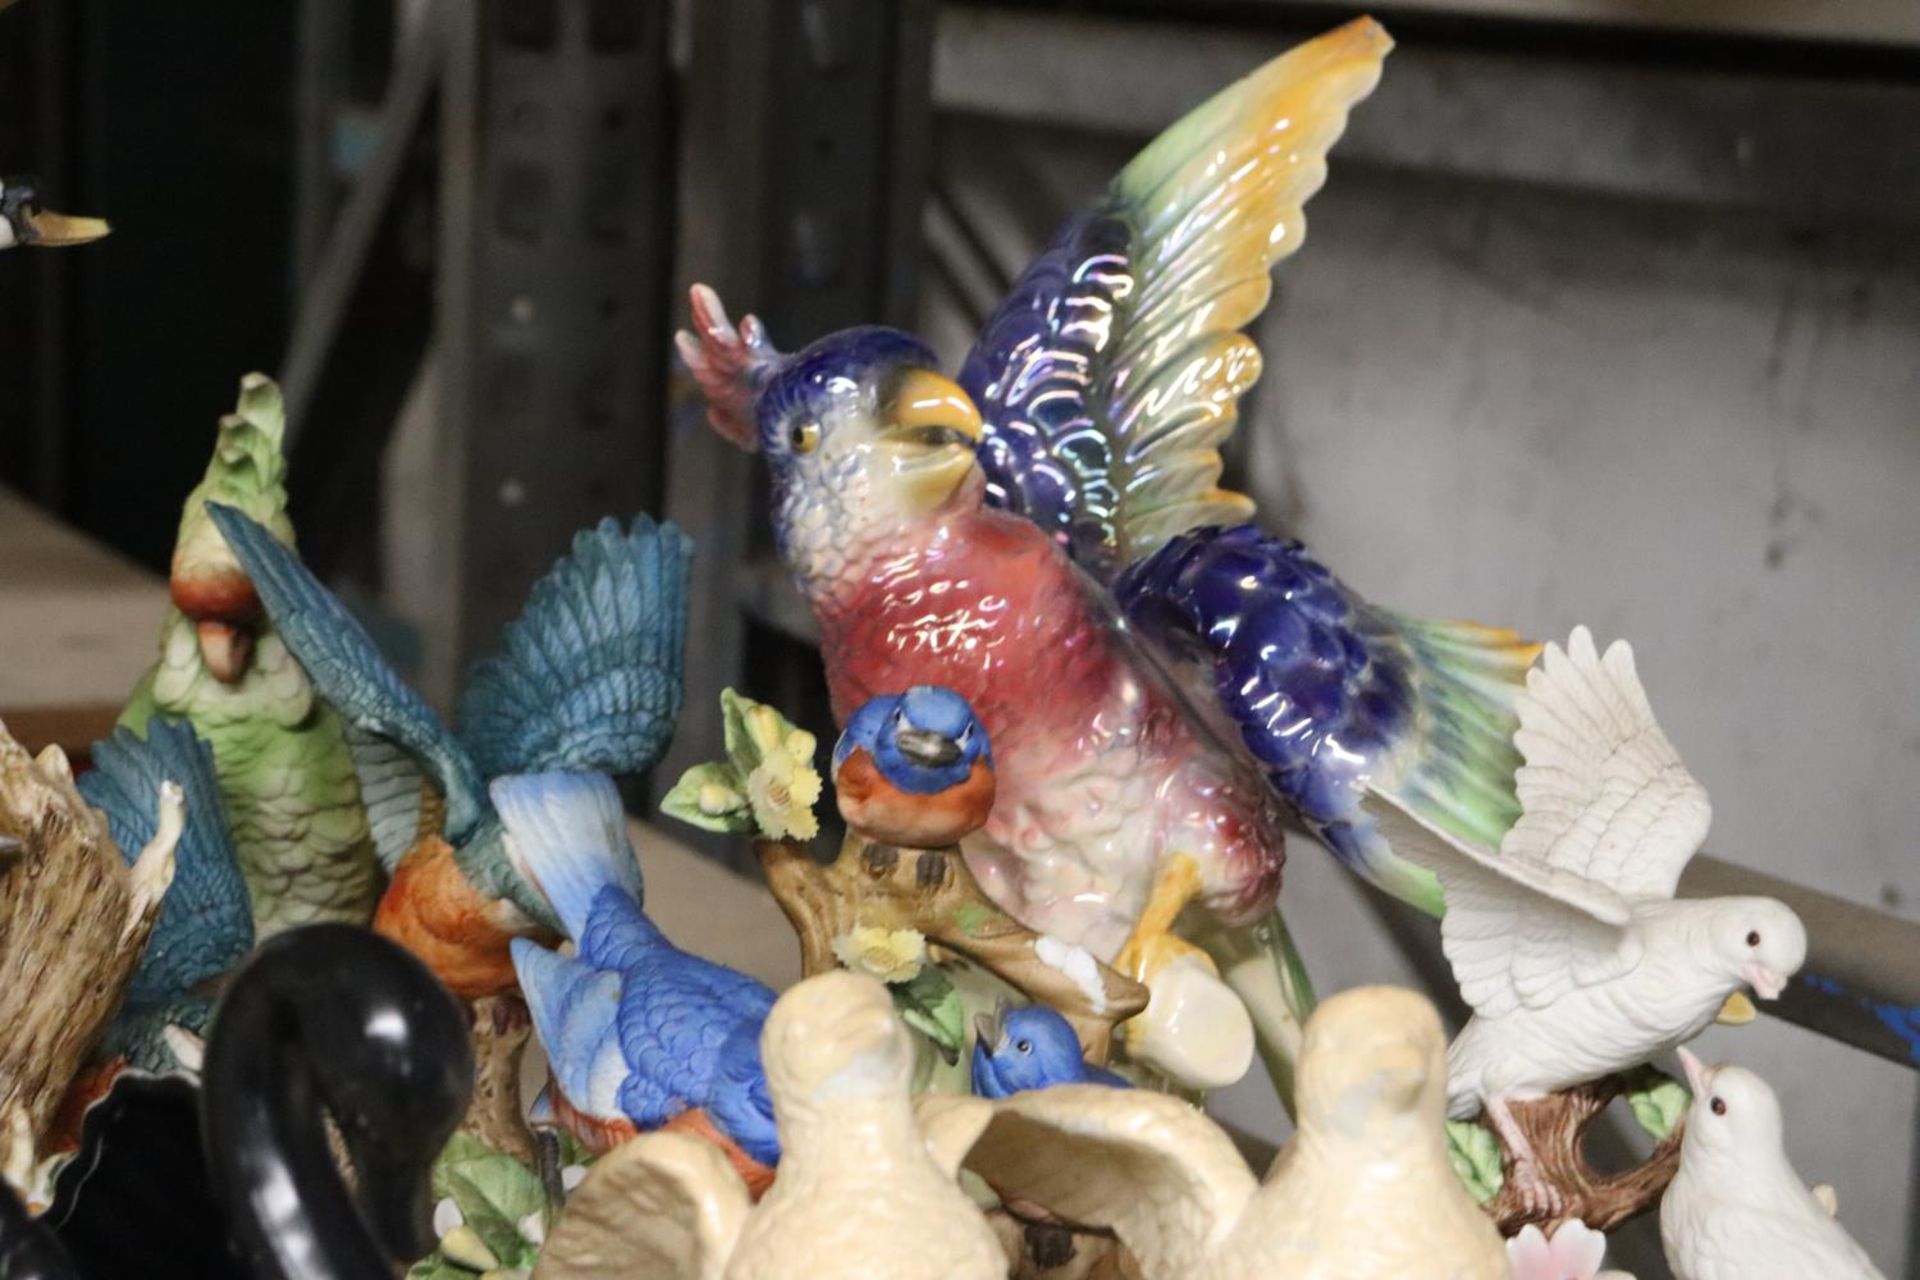 A COLLECTION OF BIRD FIGURINES TO INCLUDE SWANS, A PARROT, WOODPECKER, ETC - Image 4 of 6